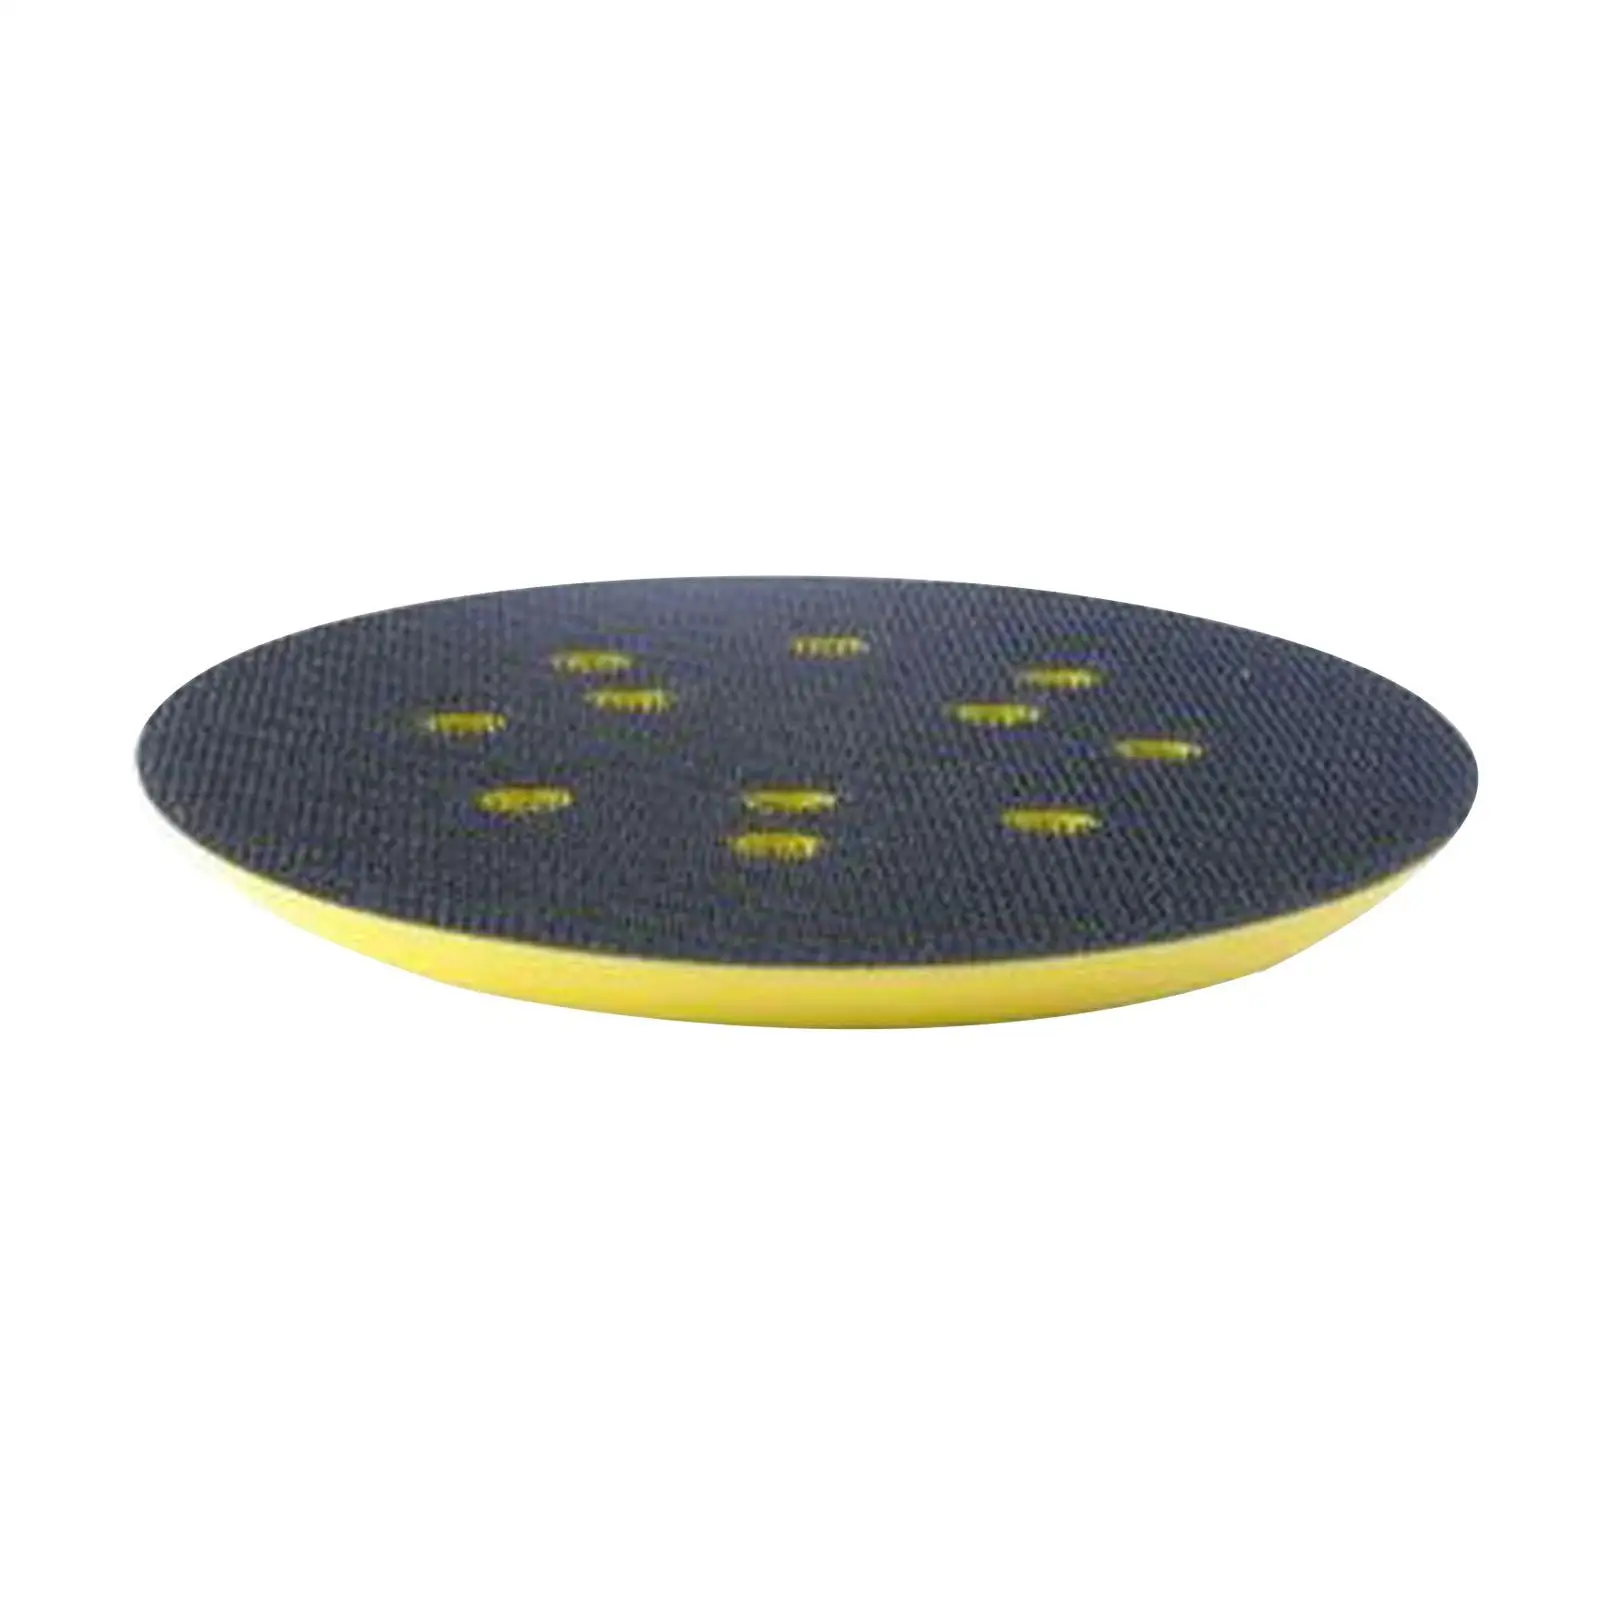 Stable Polishing Backing Pad Replacement Fitments Backer Pads